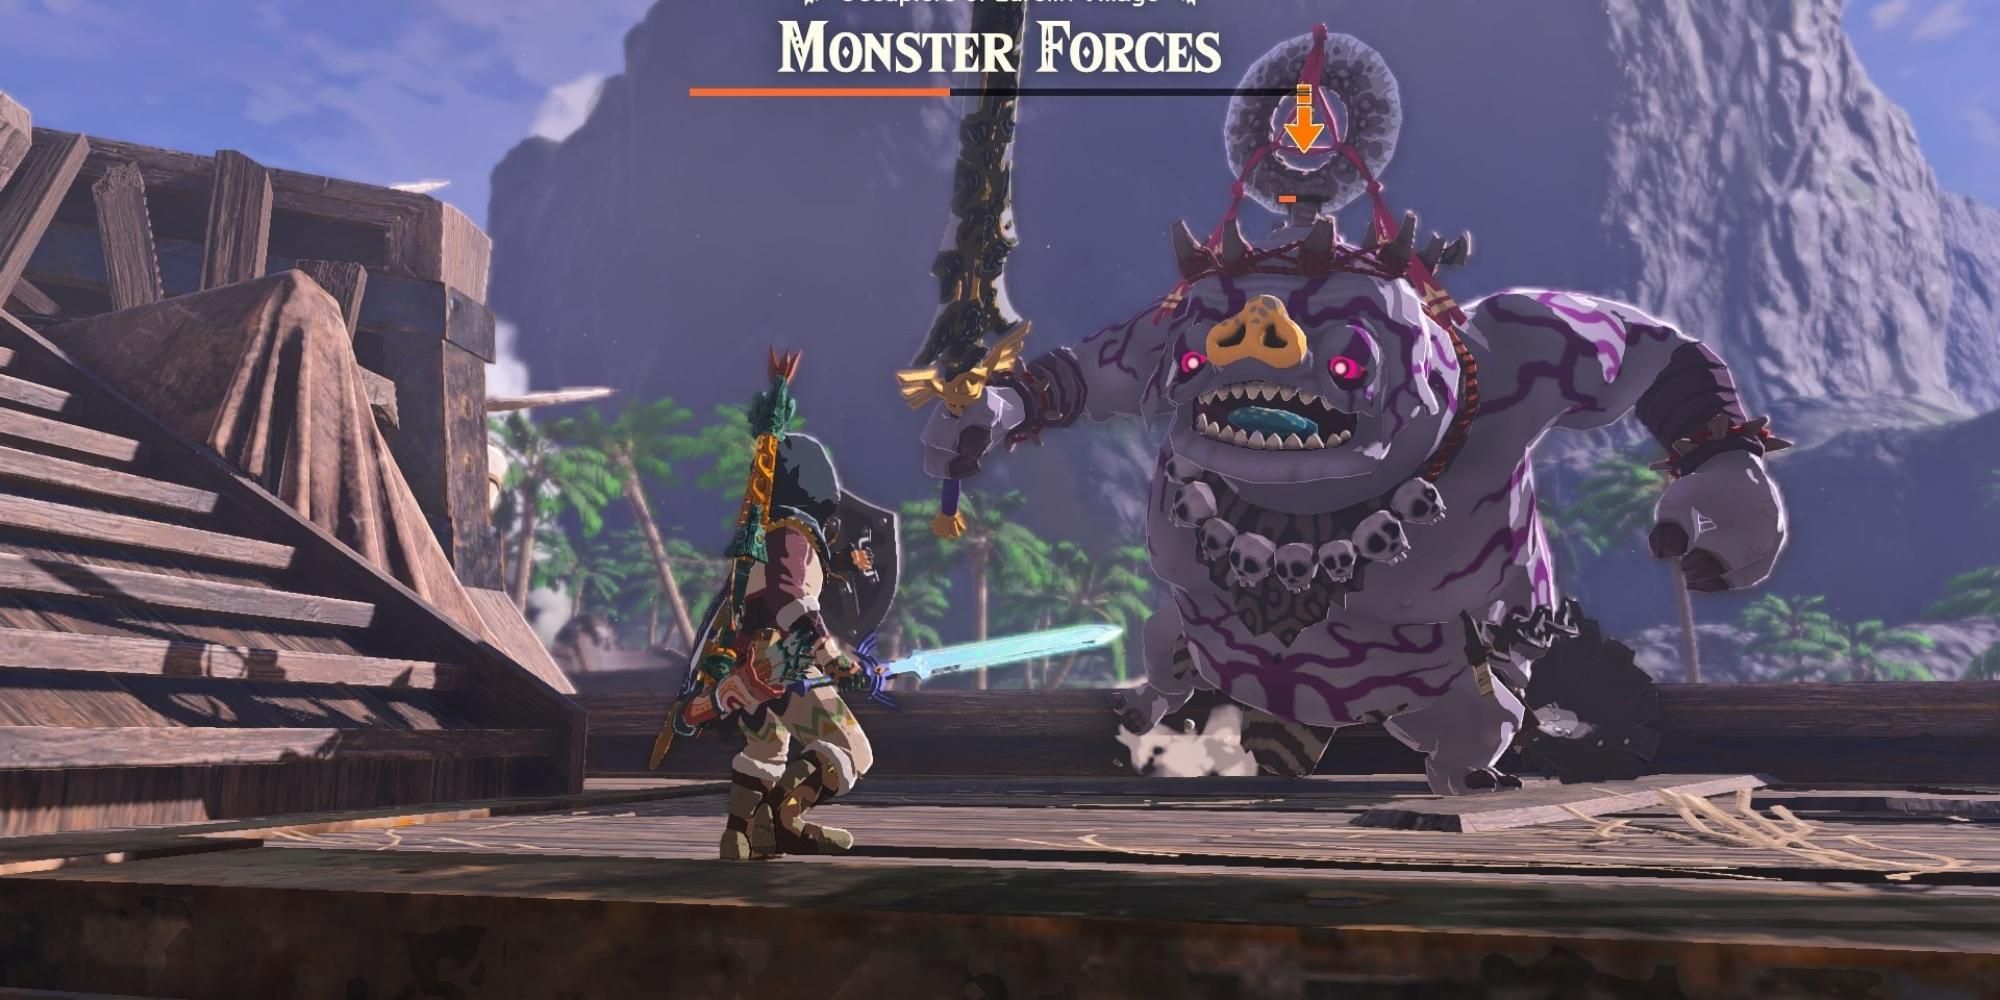 Connect the white boss's Bokoblin to complete the monster infested village mission